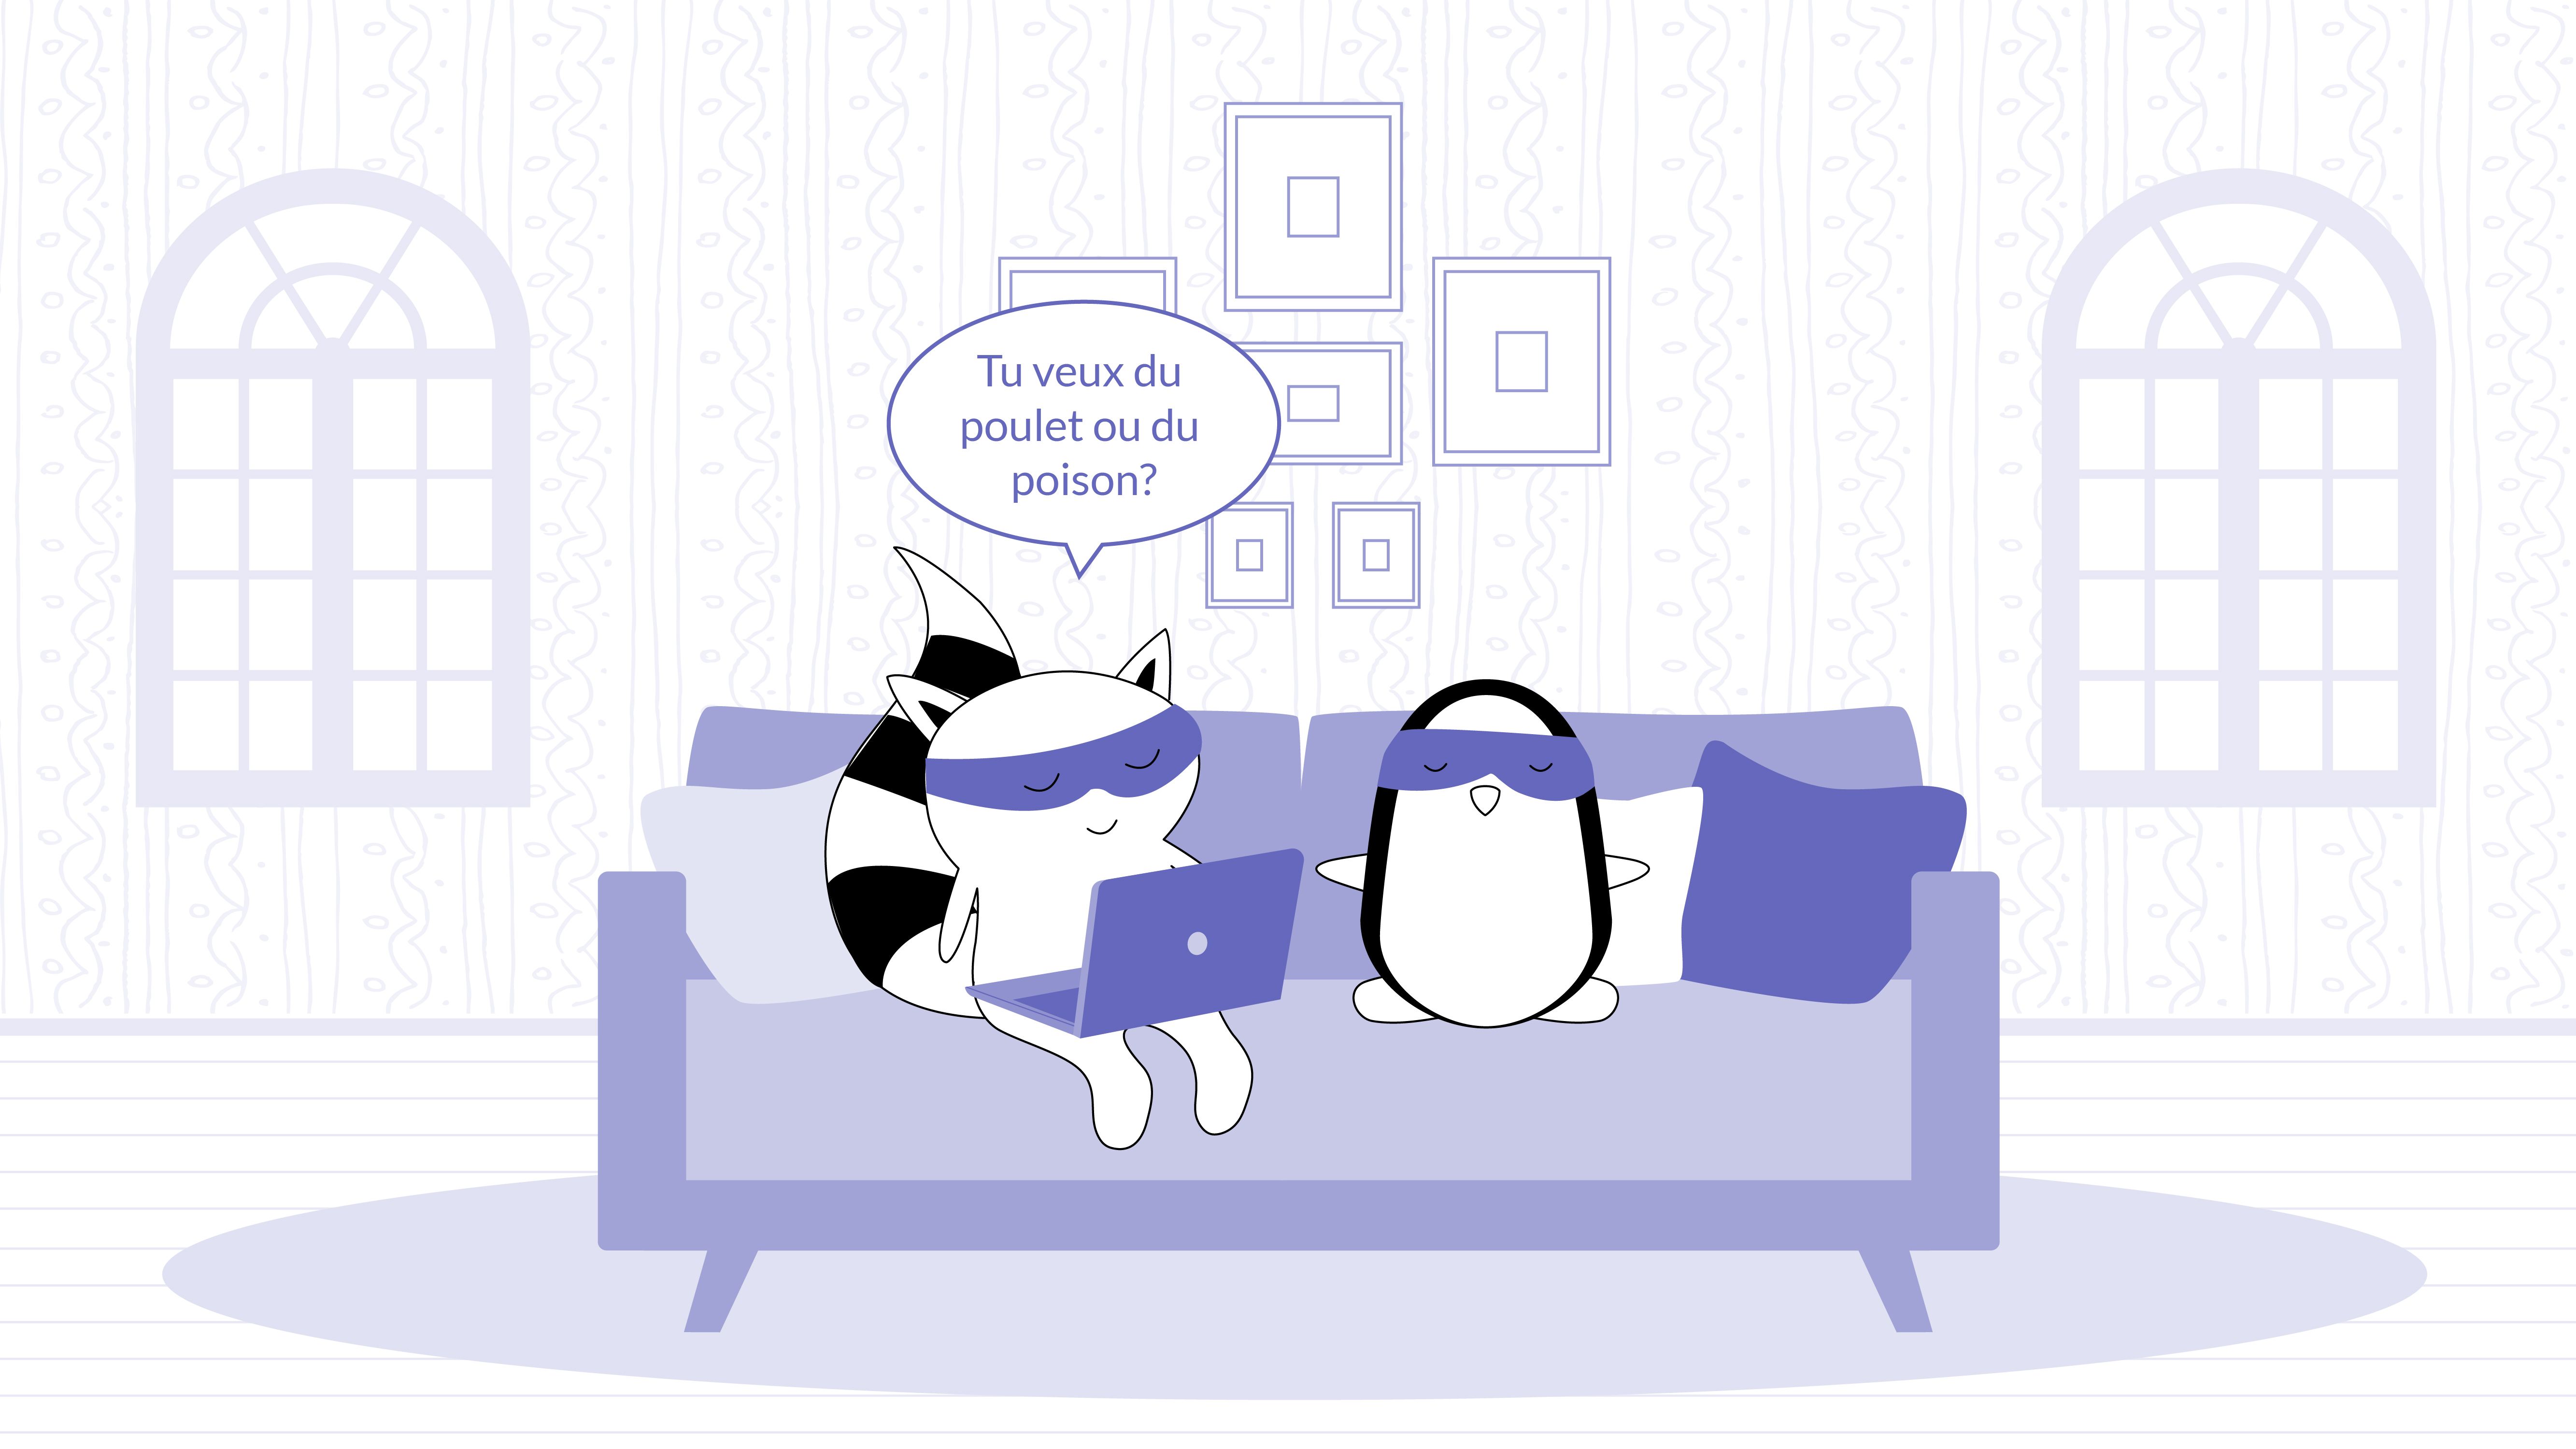 Iggy and Pocky are at home, sitting on a couch. Iggy scrolls down the food delivery website, picking something to order for dinner. She asks Pocky, “Tu veux du poulet ou du poison?”